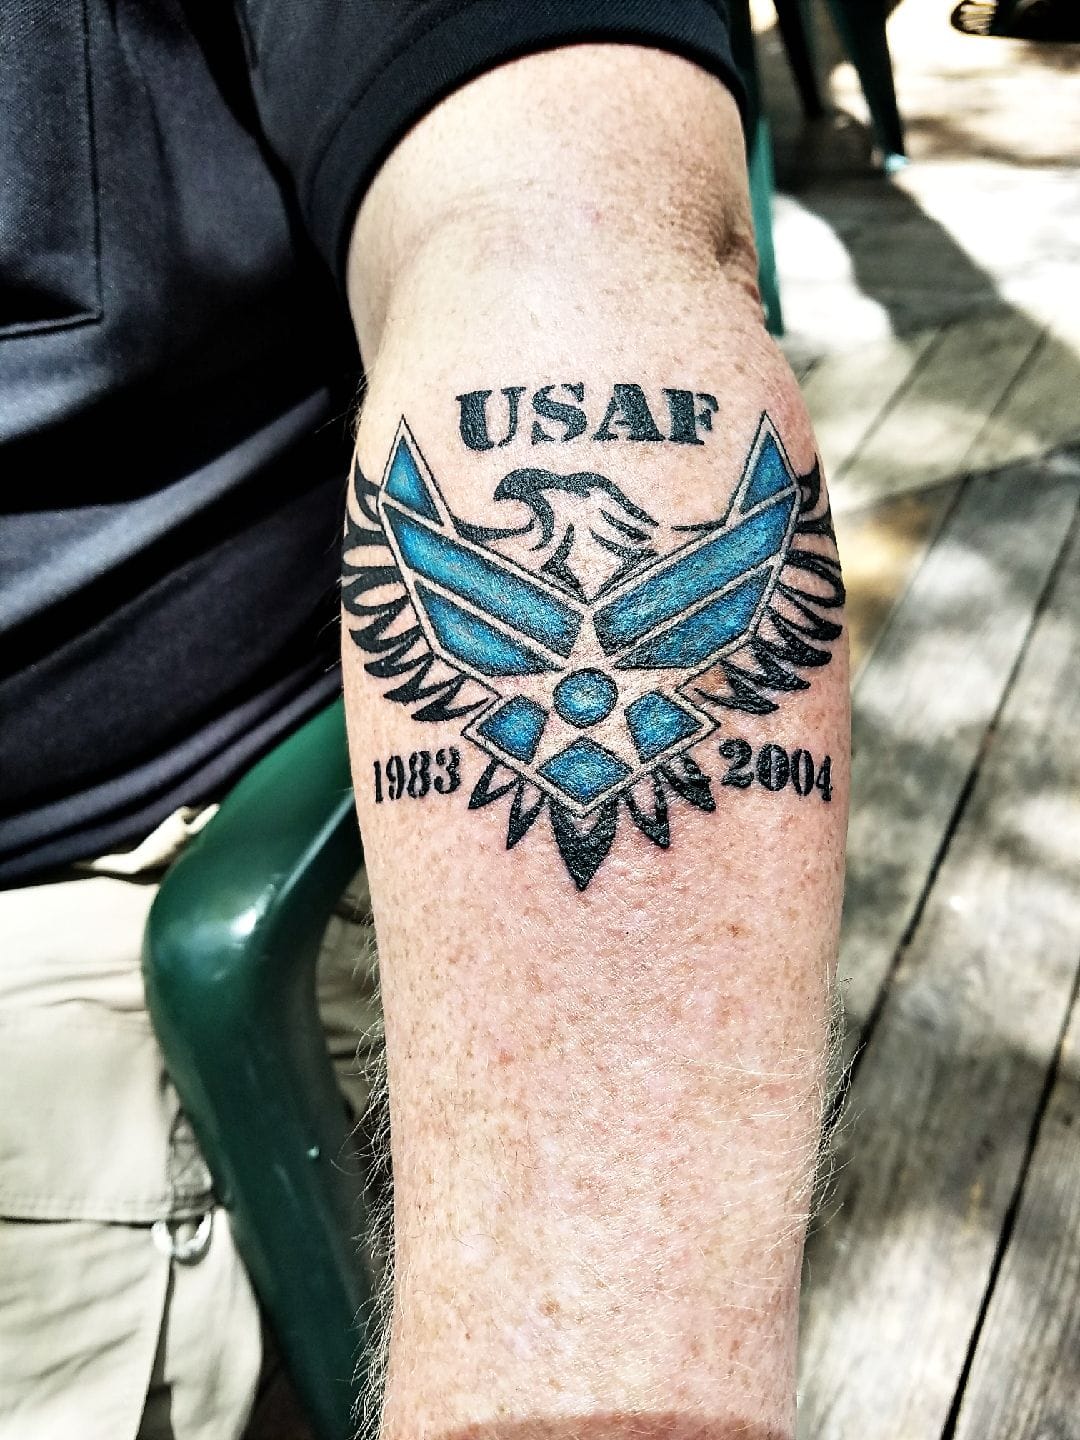 Air force tattoo meanings